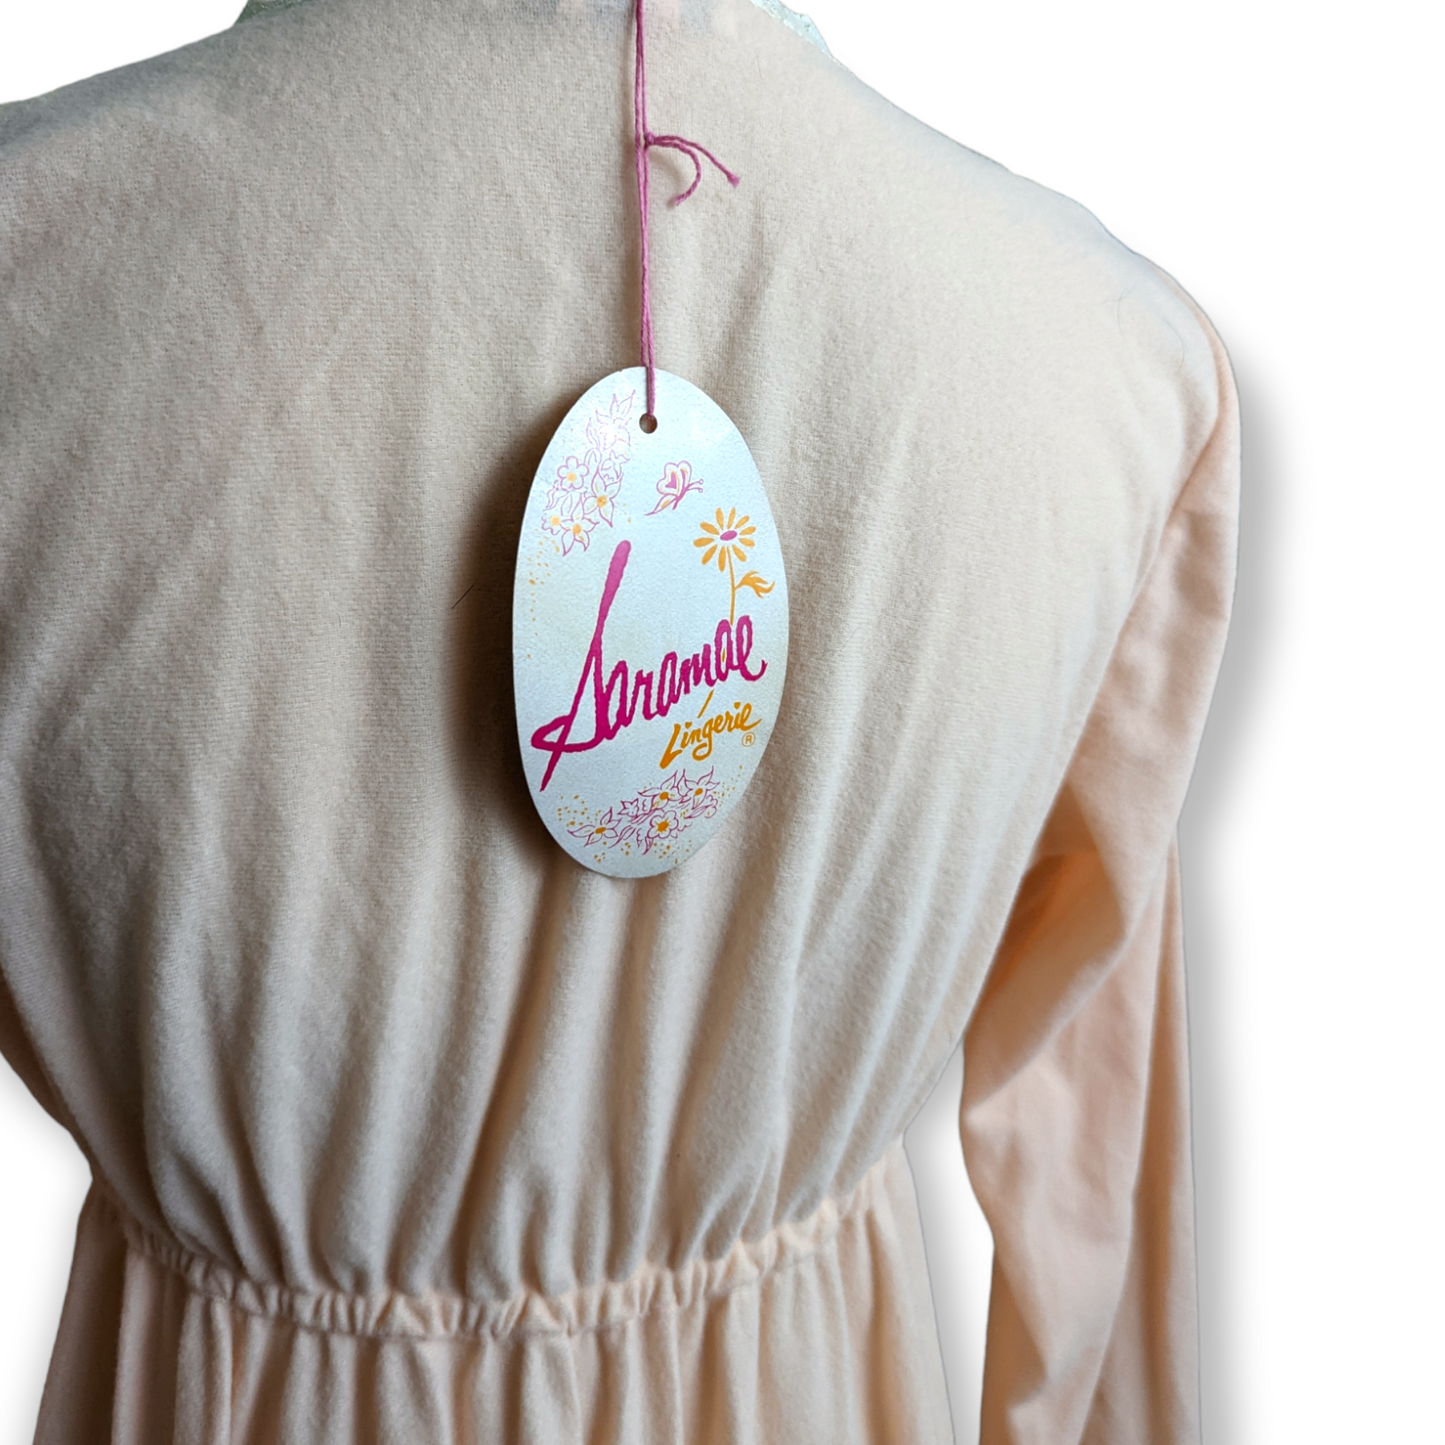 1970s Floor Length Soft Pink Saramae Lingerie Nightgown with Long Sleeves, Lace Cuffs, and Original Tags | Deadstock